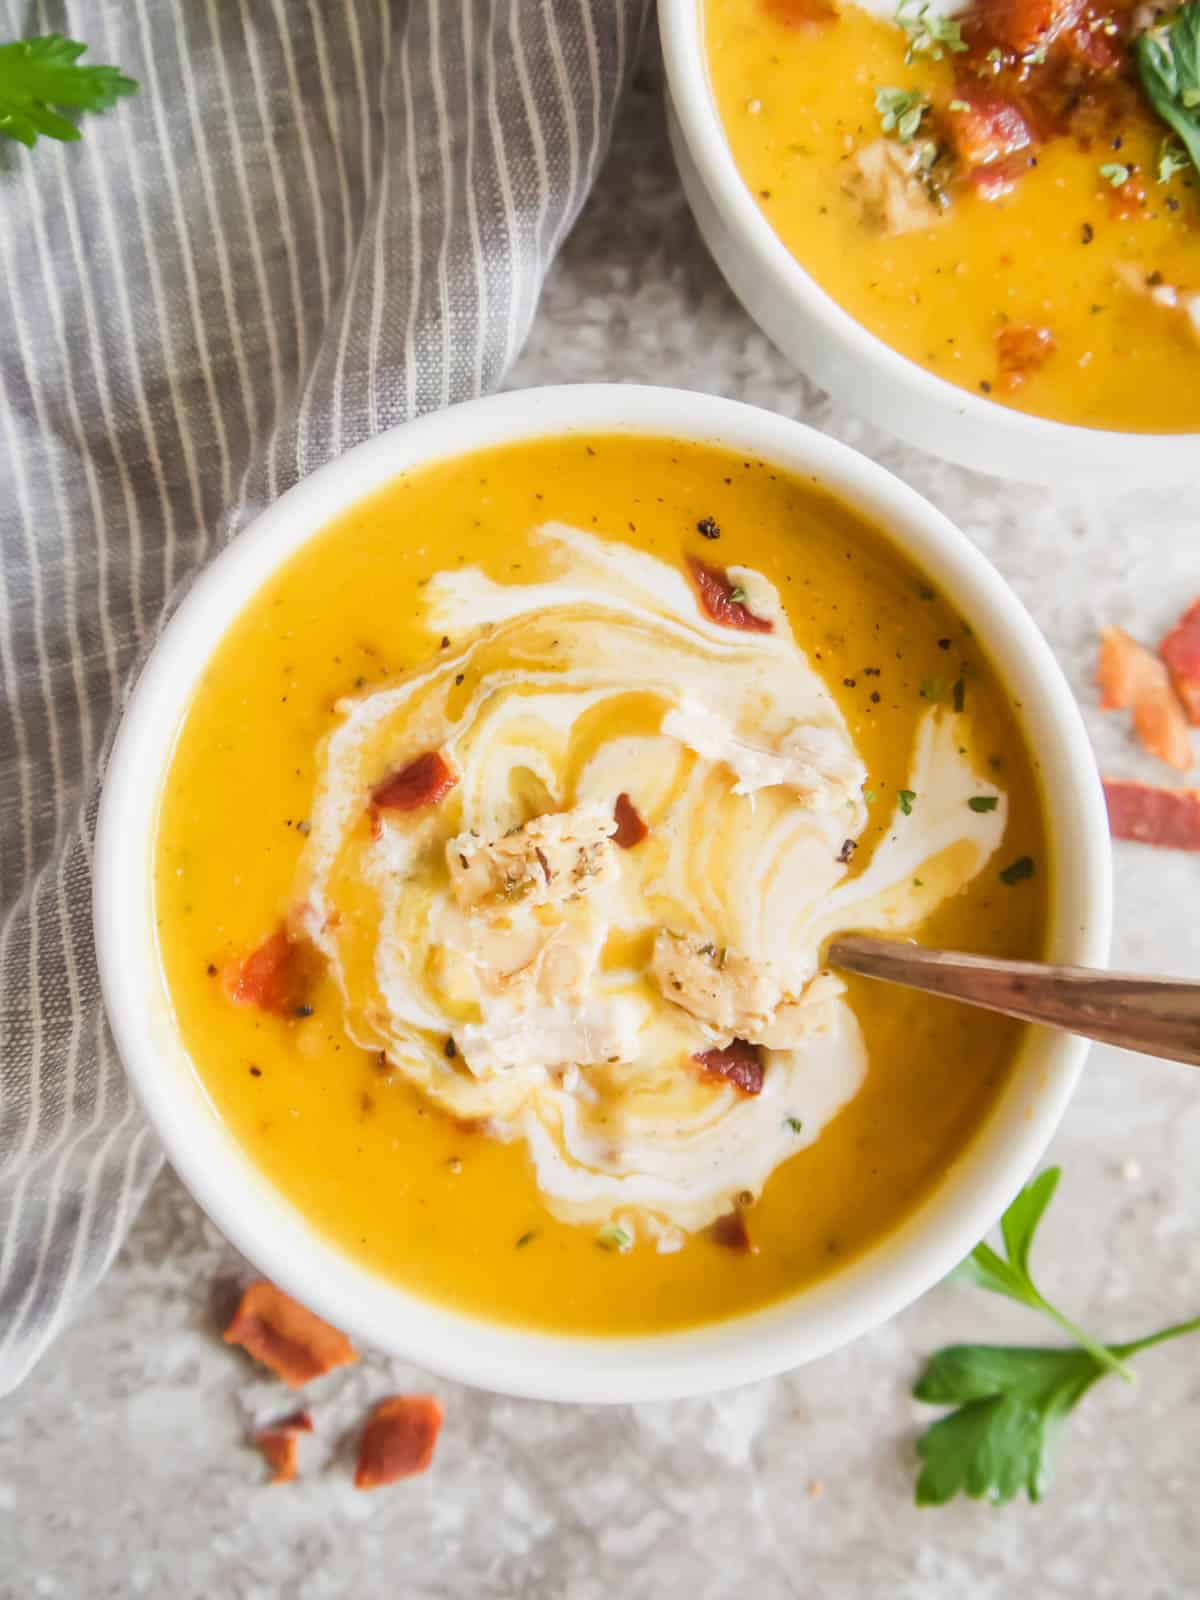 Butternut squash soup with bacon and chicken inside of it.